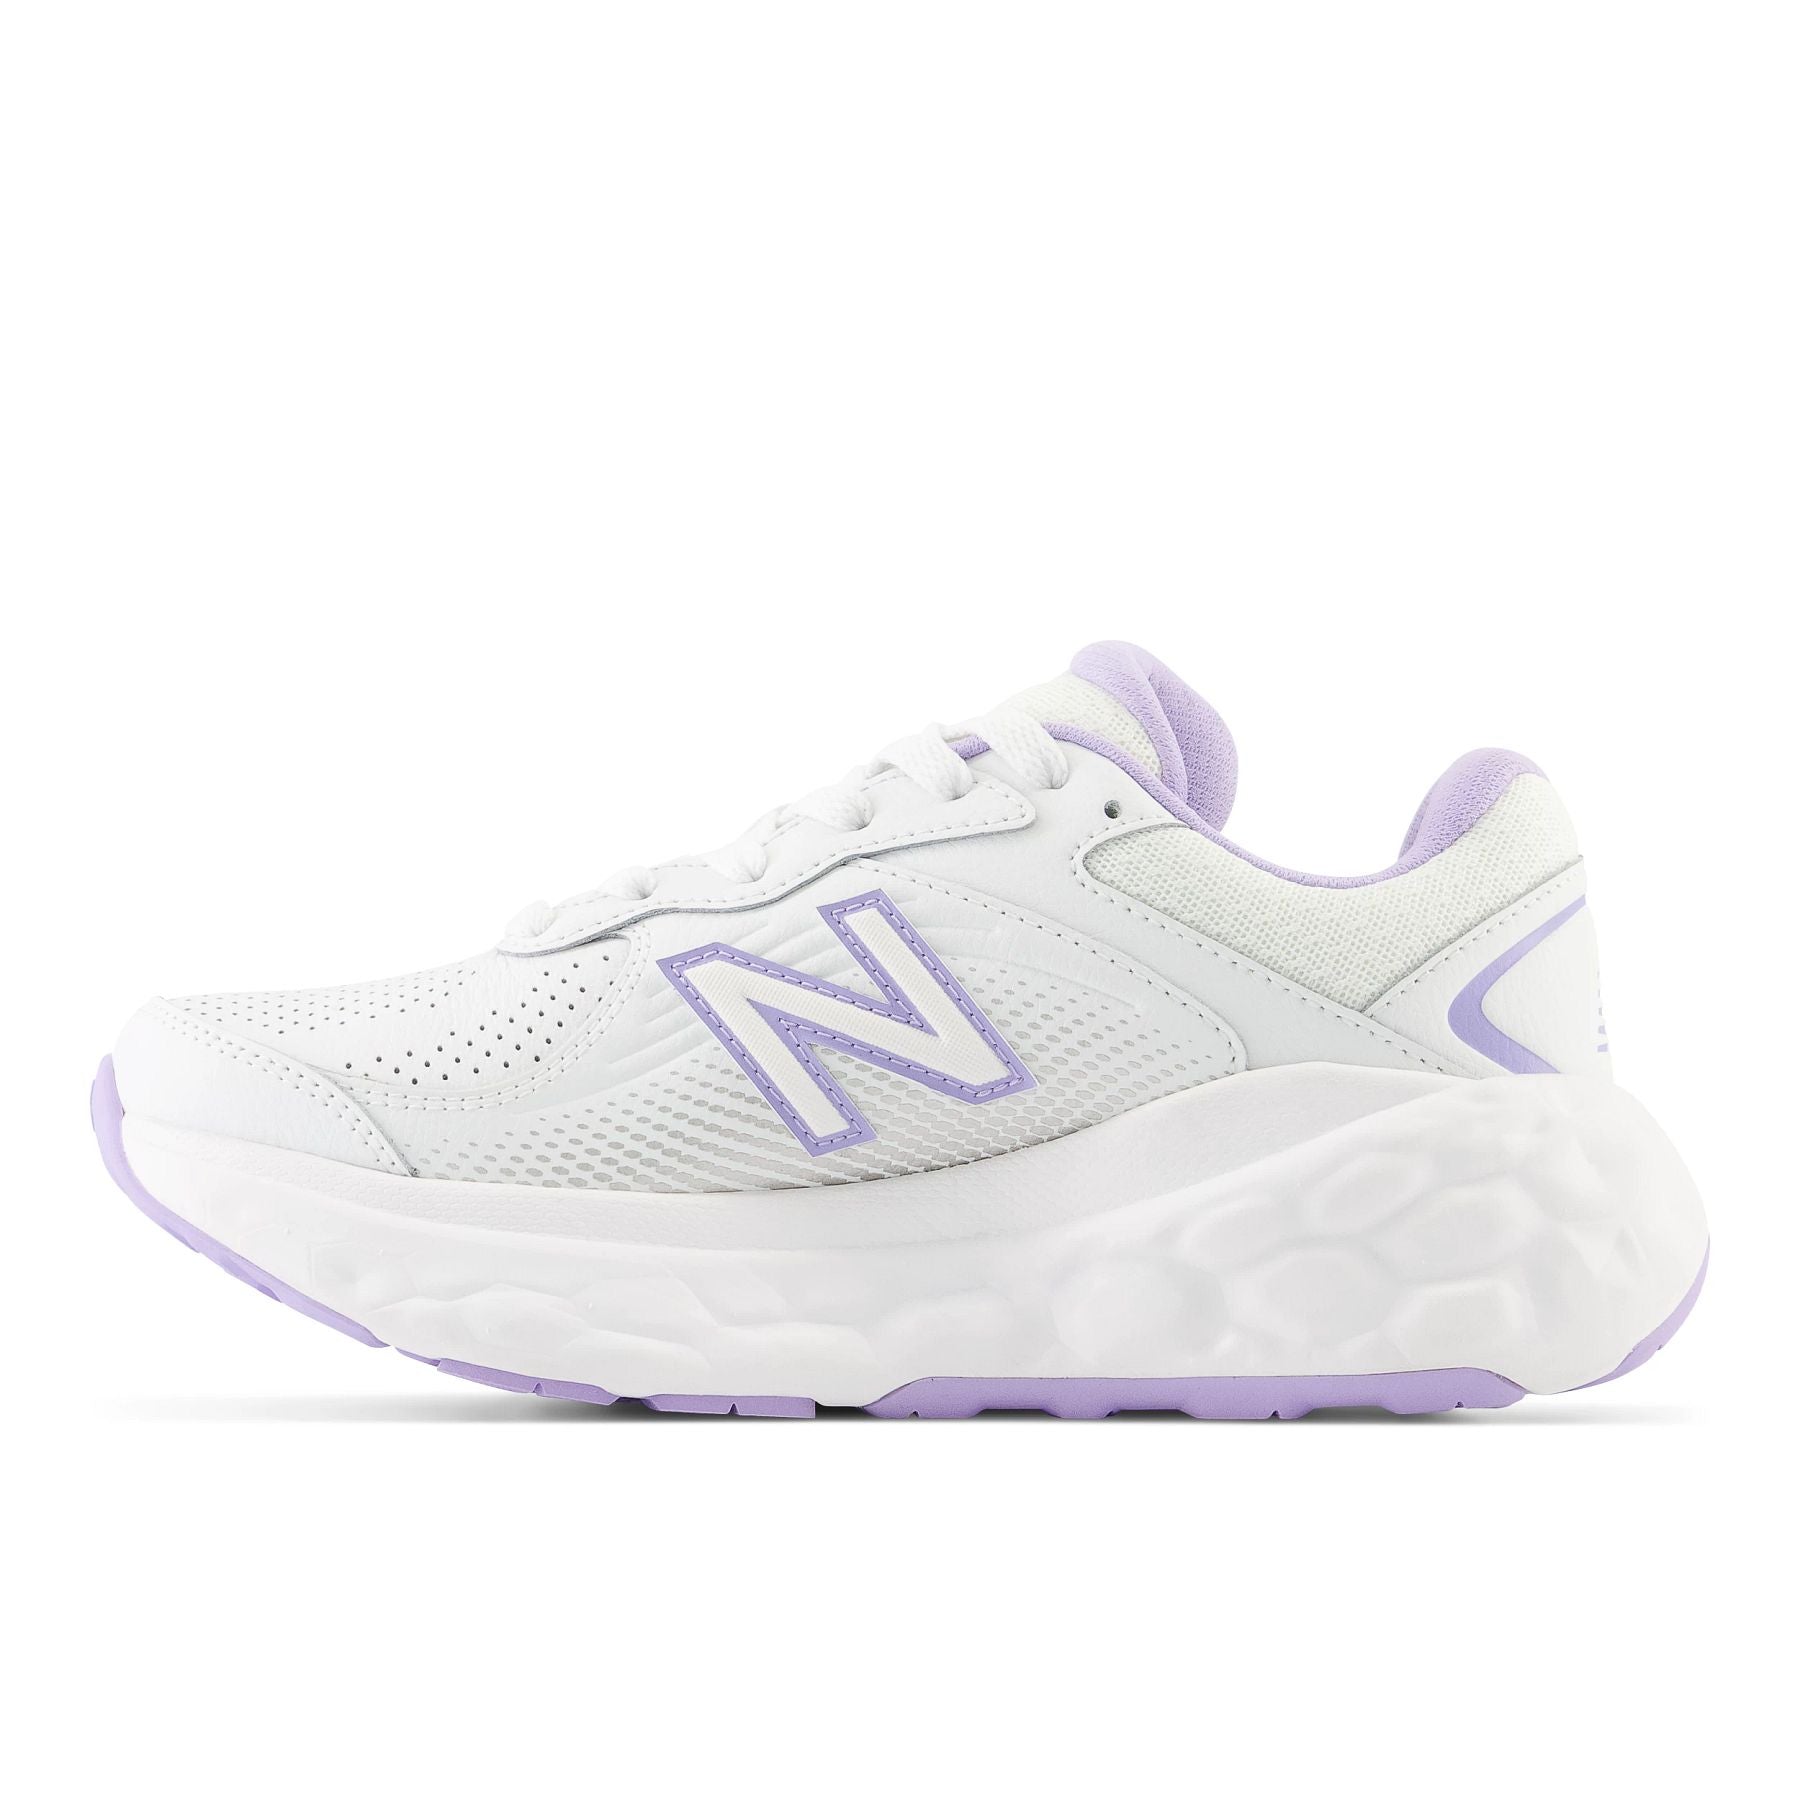 Medial view of the Women's leather walking shoe WW840 V1 by New Balance in White/Light Purple